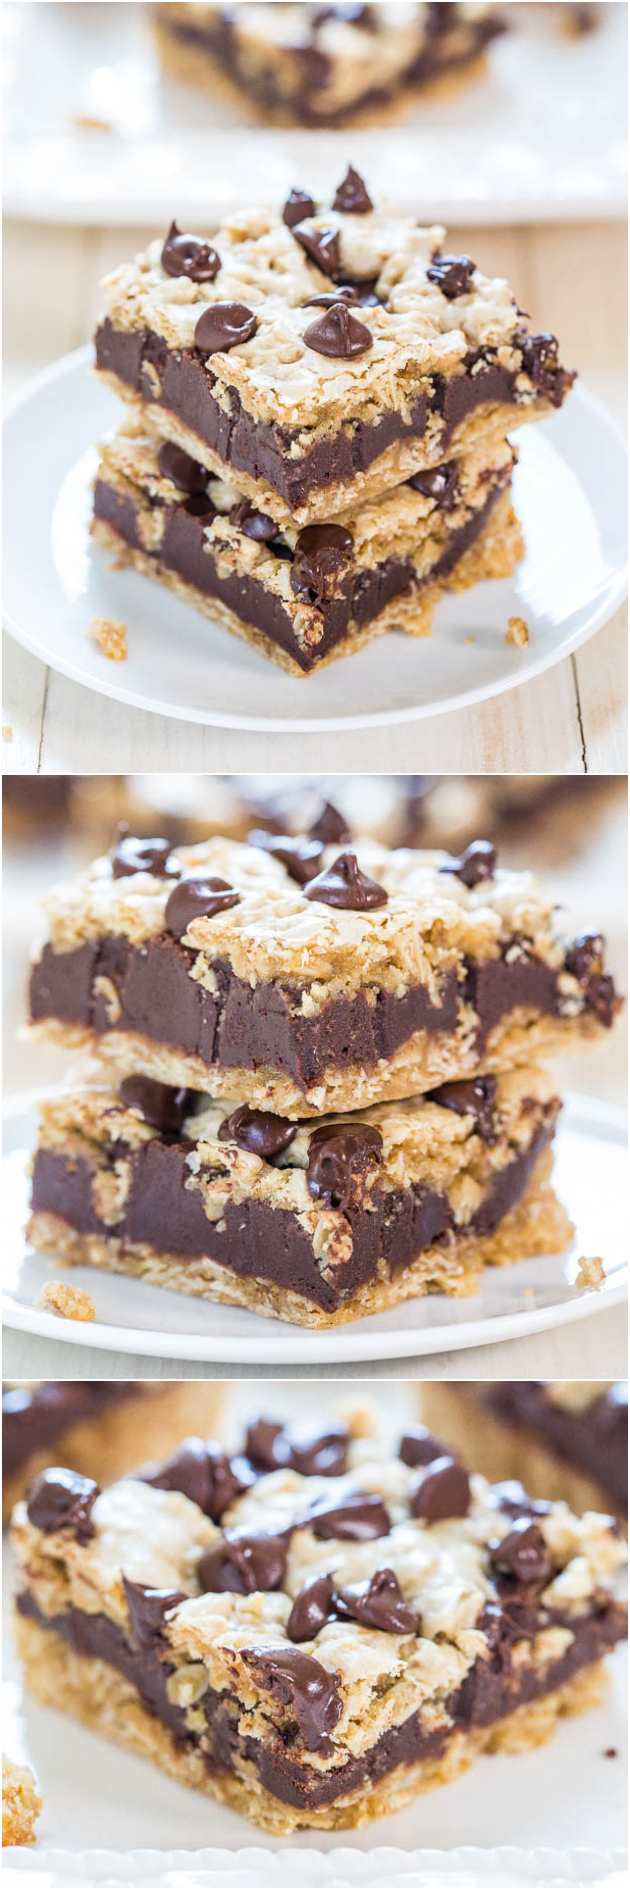 Fudgy Oatmeal Chocolate Chip Cookie Bars - Chewy bars with a thick layer of fudge in the middle! Whoa, hello chocolate overload!!